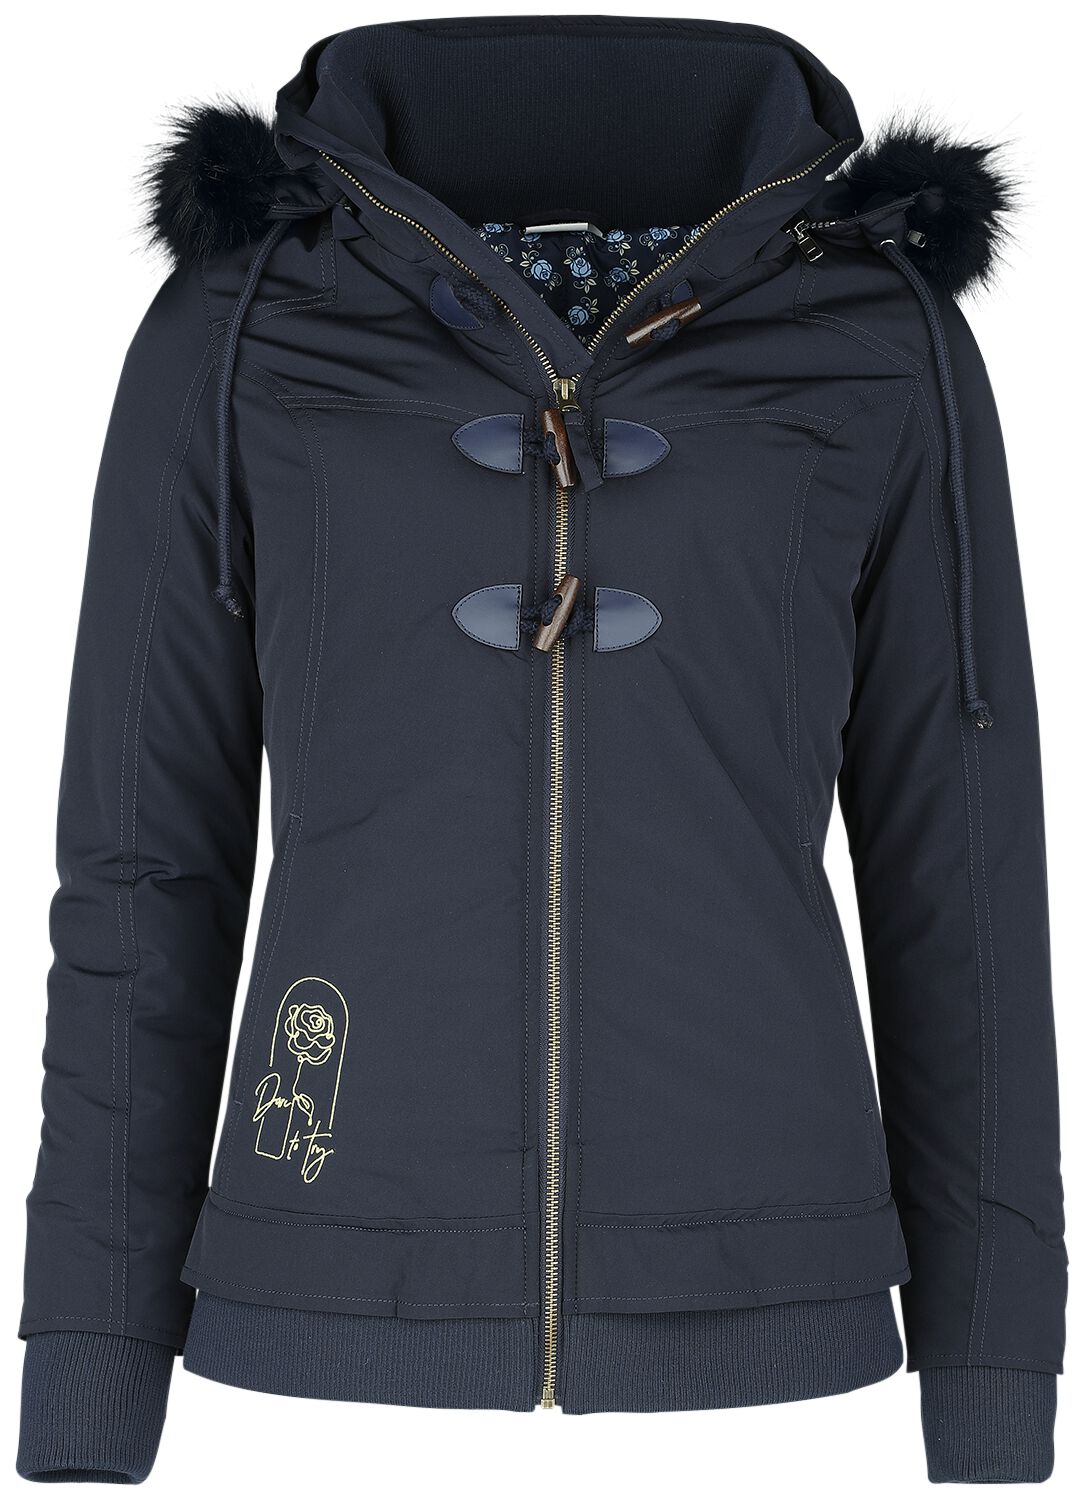 Beauty and the Beast Never Judge Winter Jacket blue